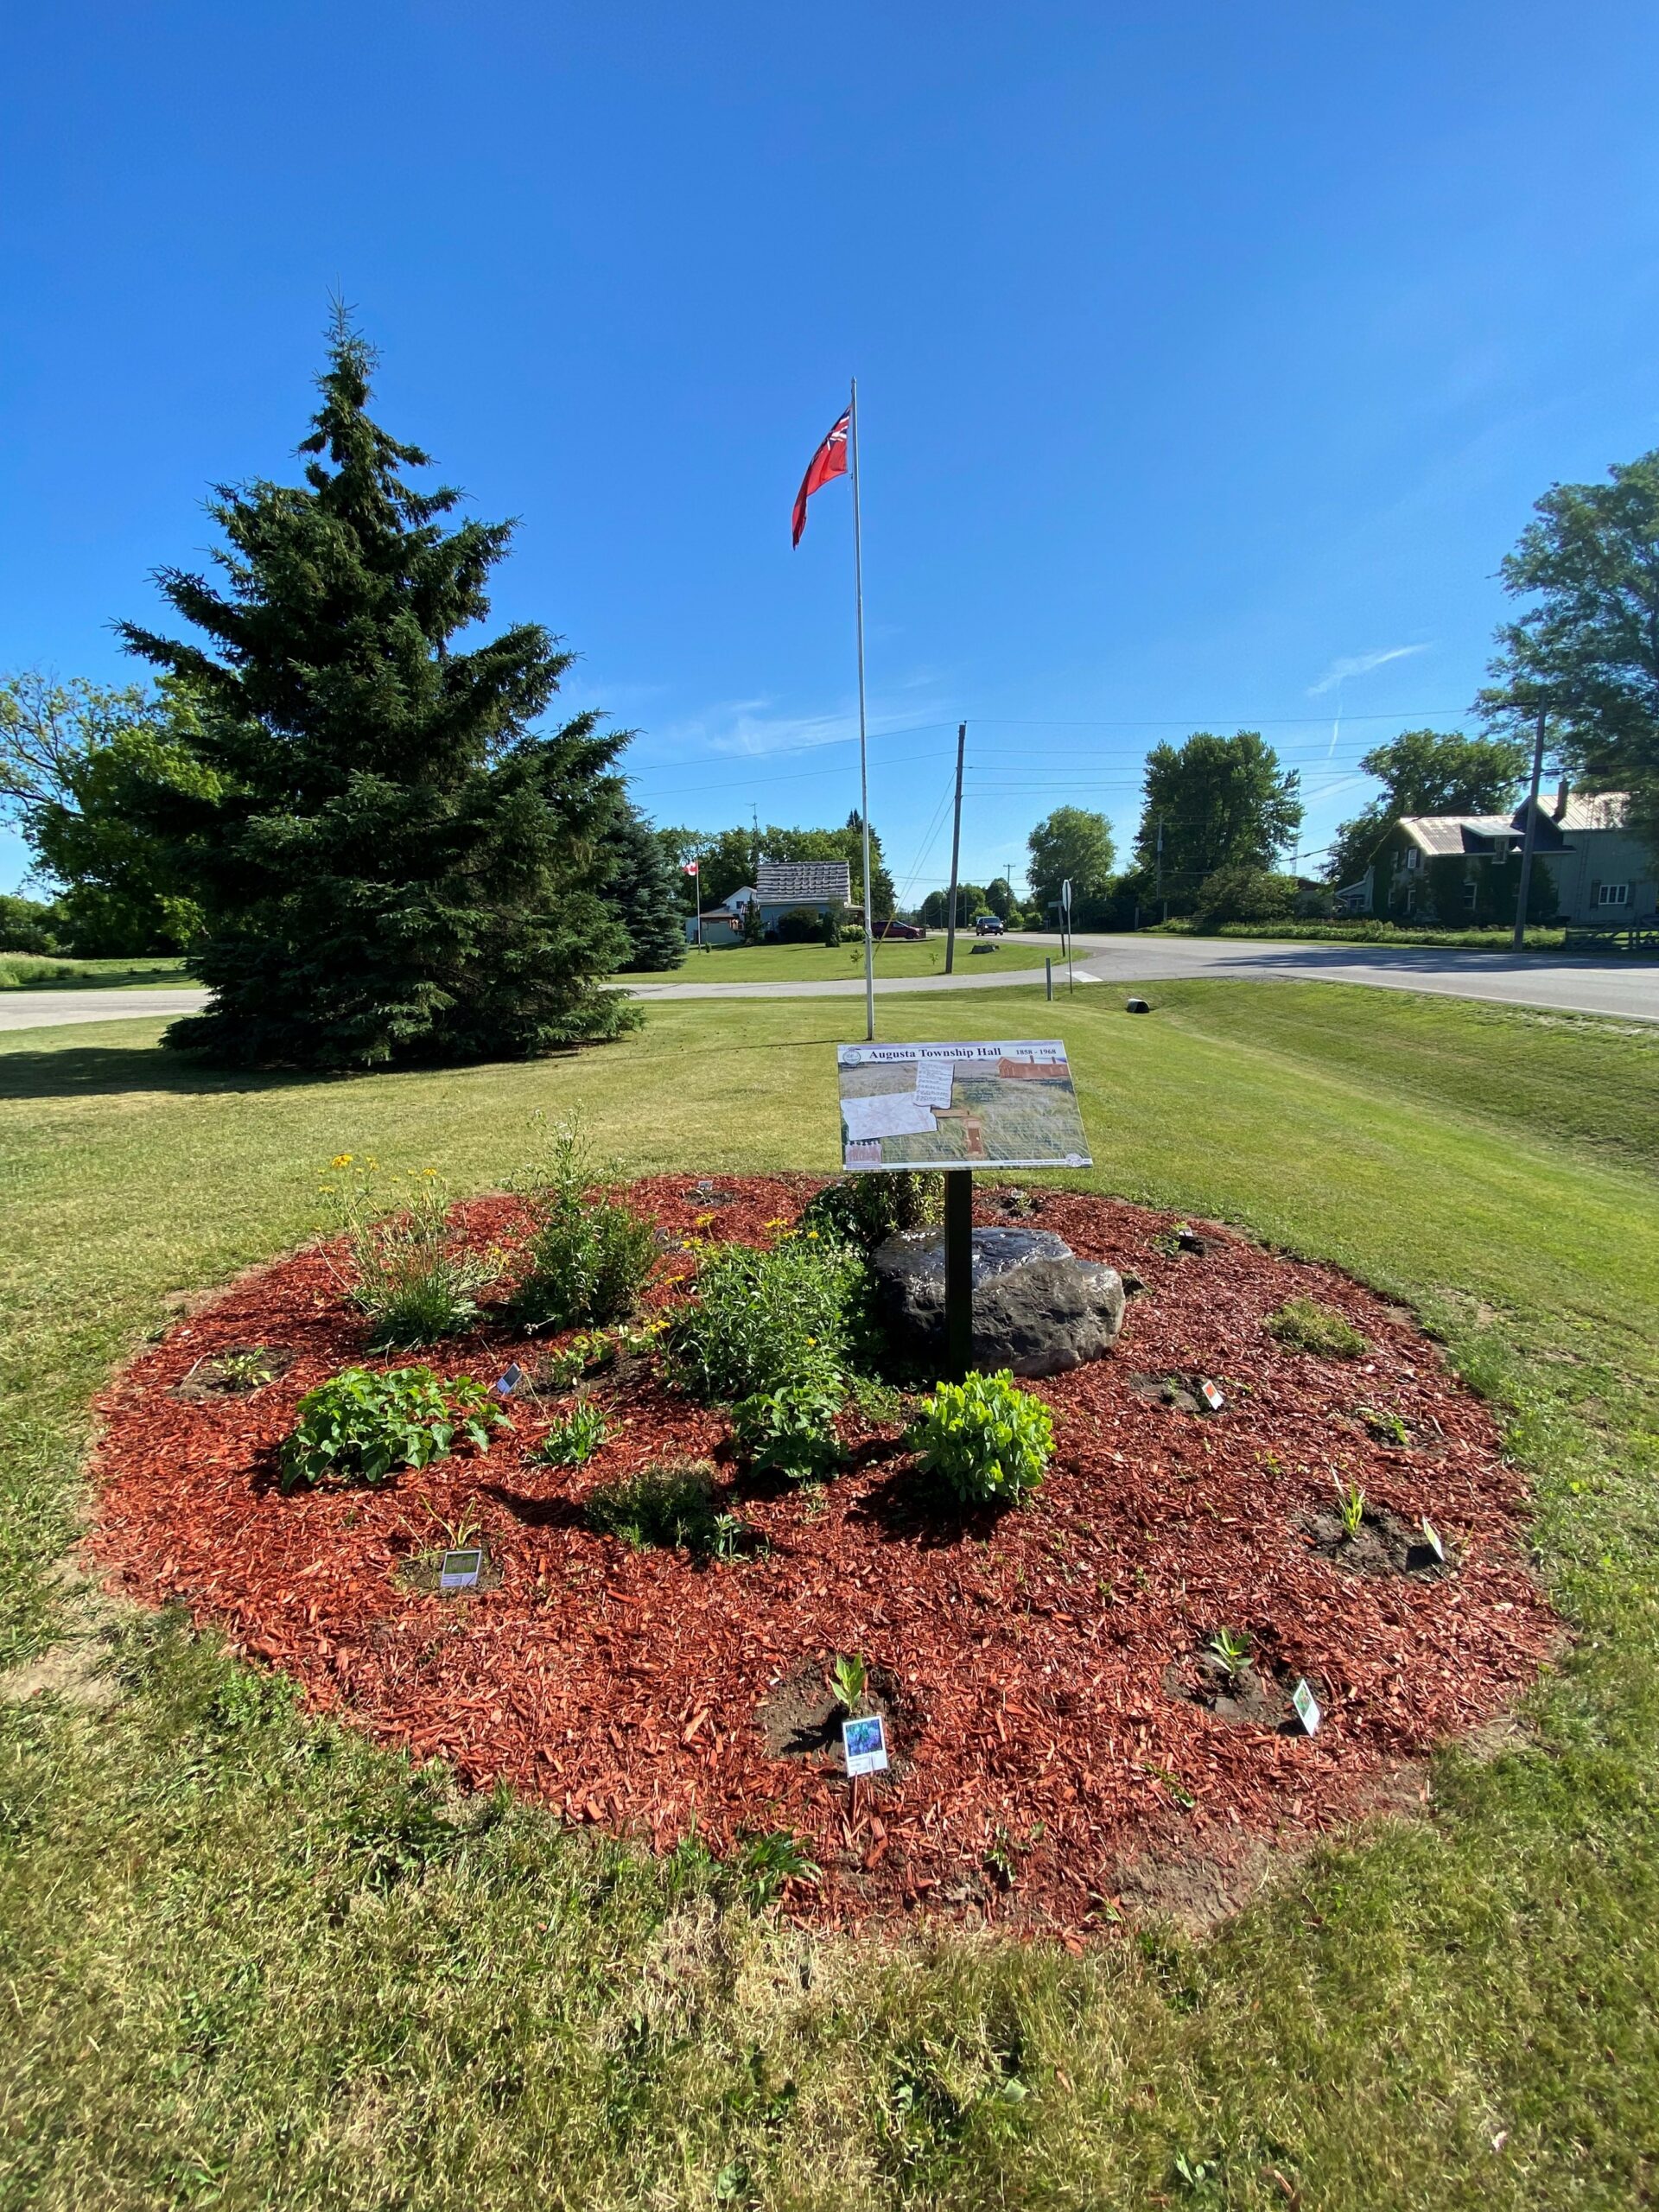 pollinator garden in front of the township office in Maynard